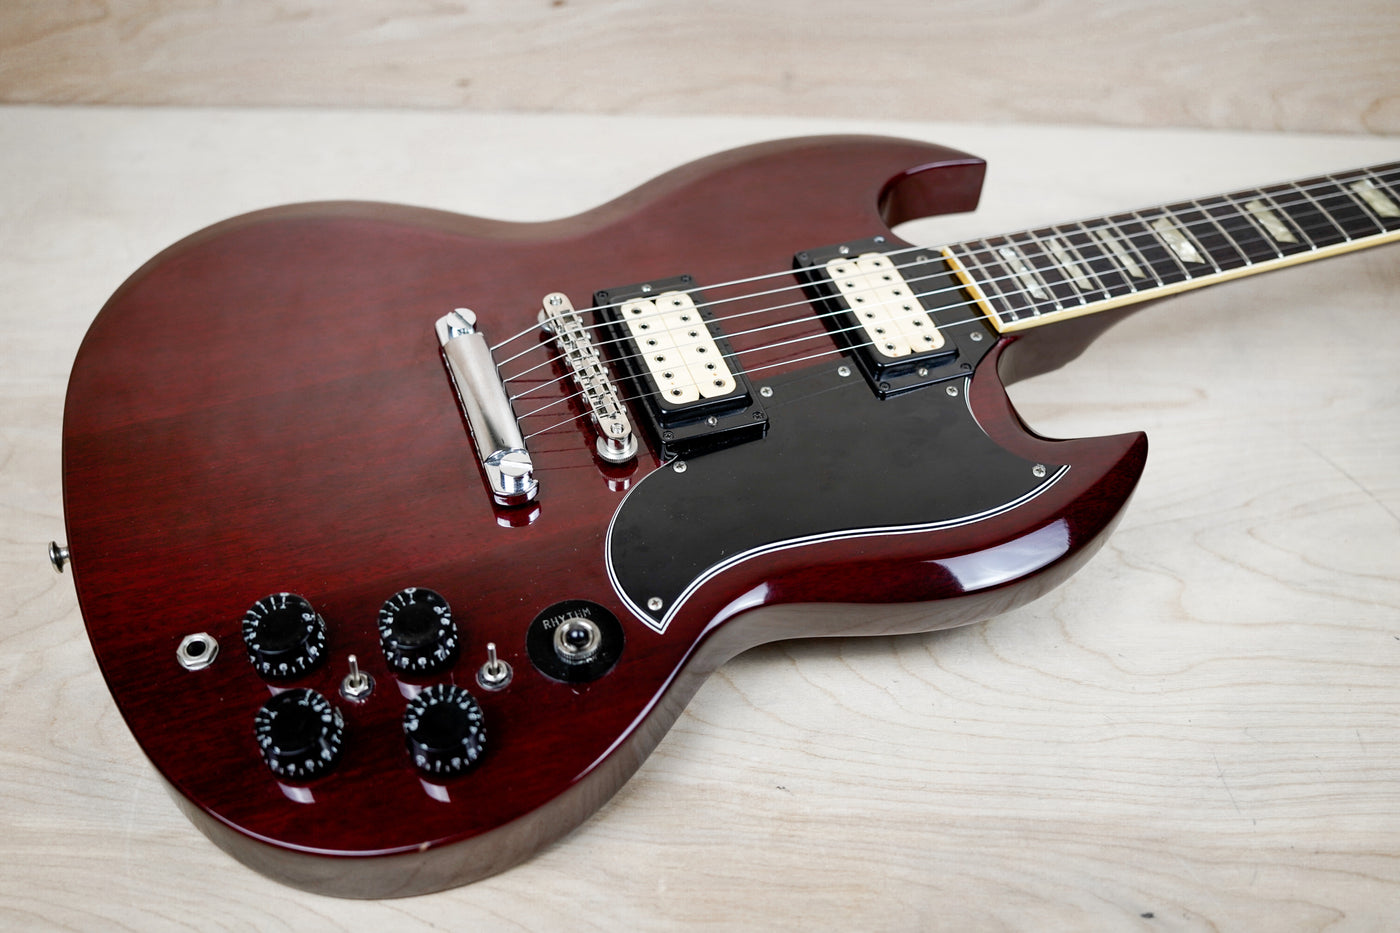 Burny RSG-75-63 MIJ 1980 Cherry  63' Reissue Vintage SG Style Guitar Made in Japan w/ Bag